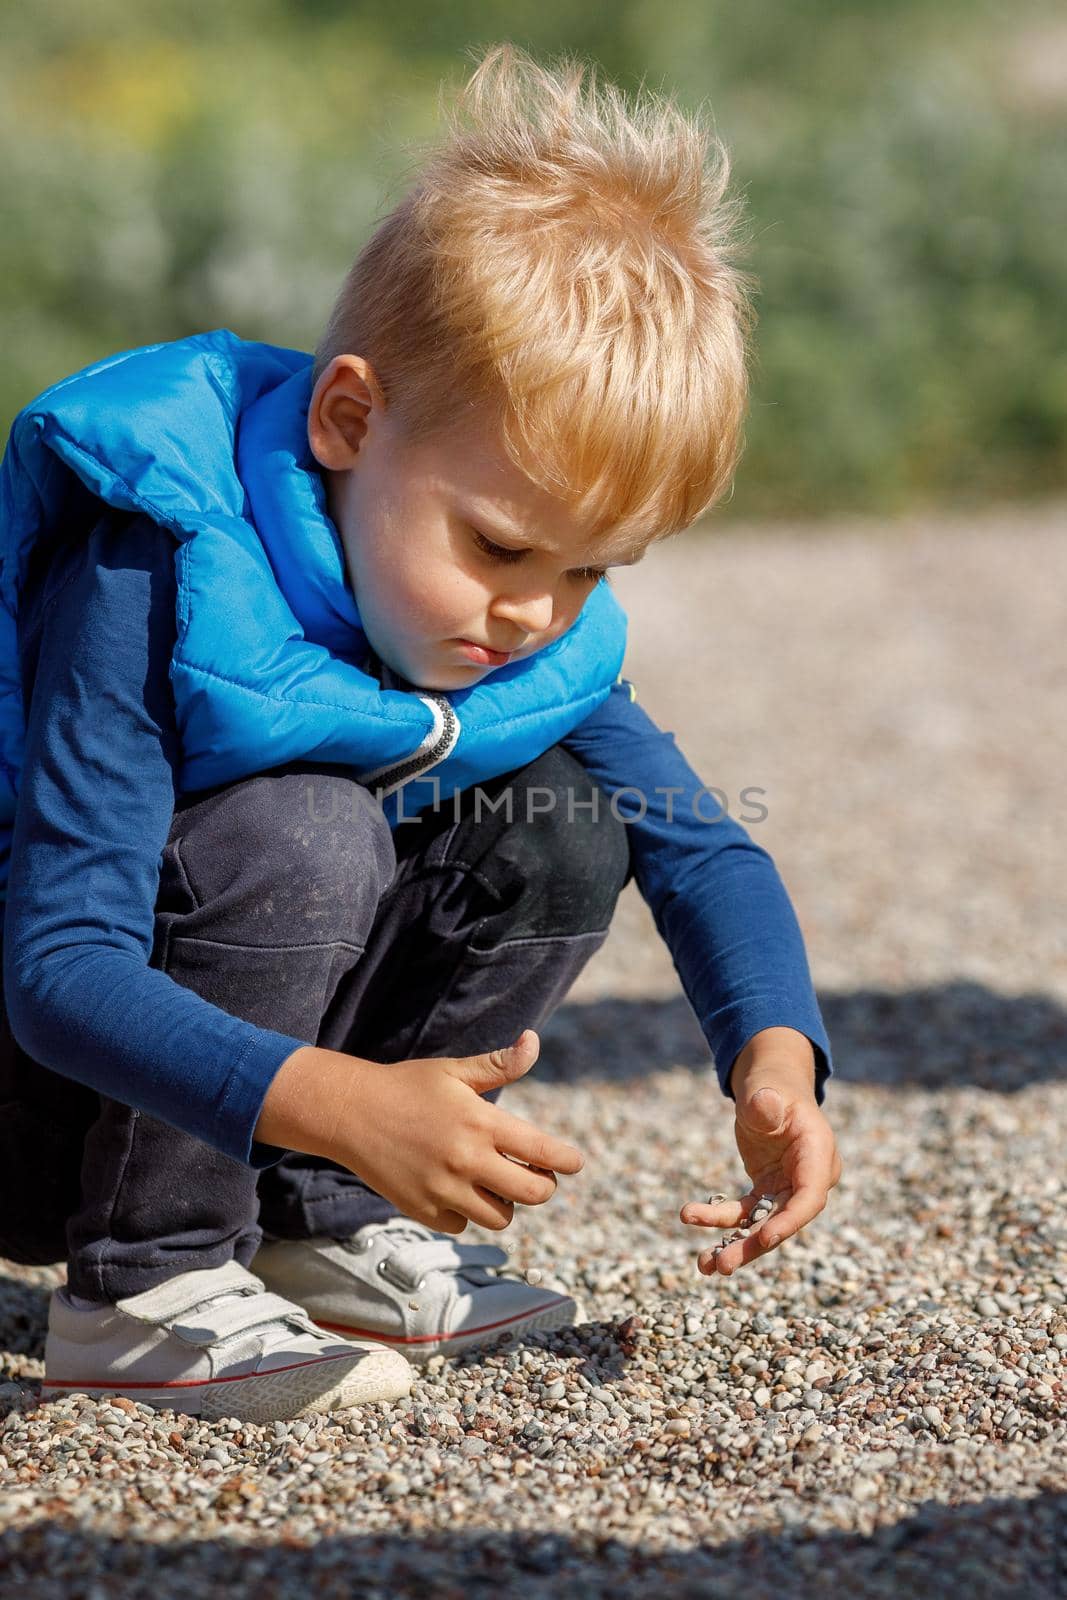 The little boy kneels on the gravel, he touches the small pebbles with his hands. The child becomes acquainted with the environment and materials. by Lincikas